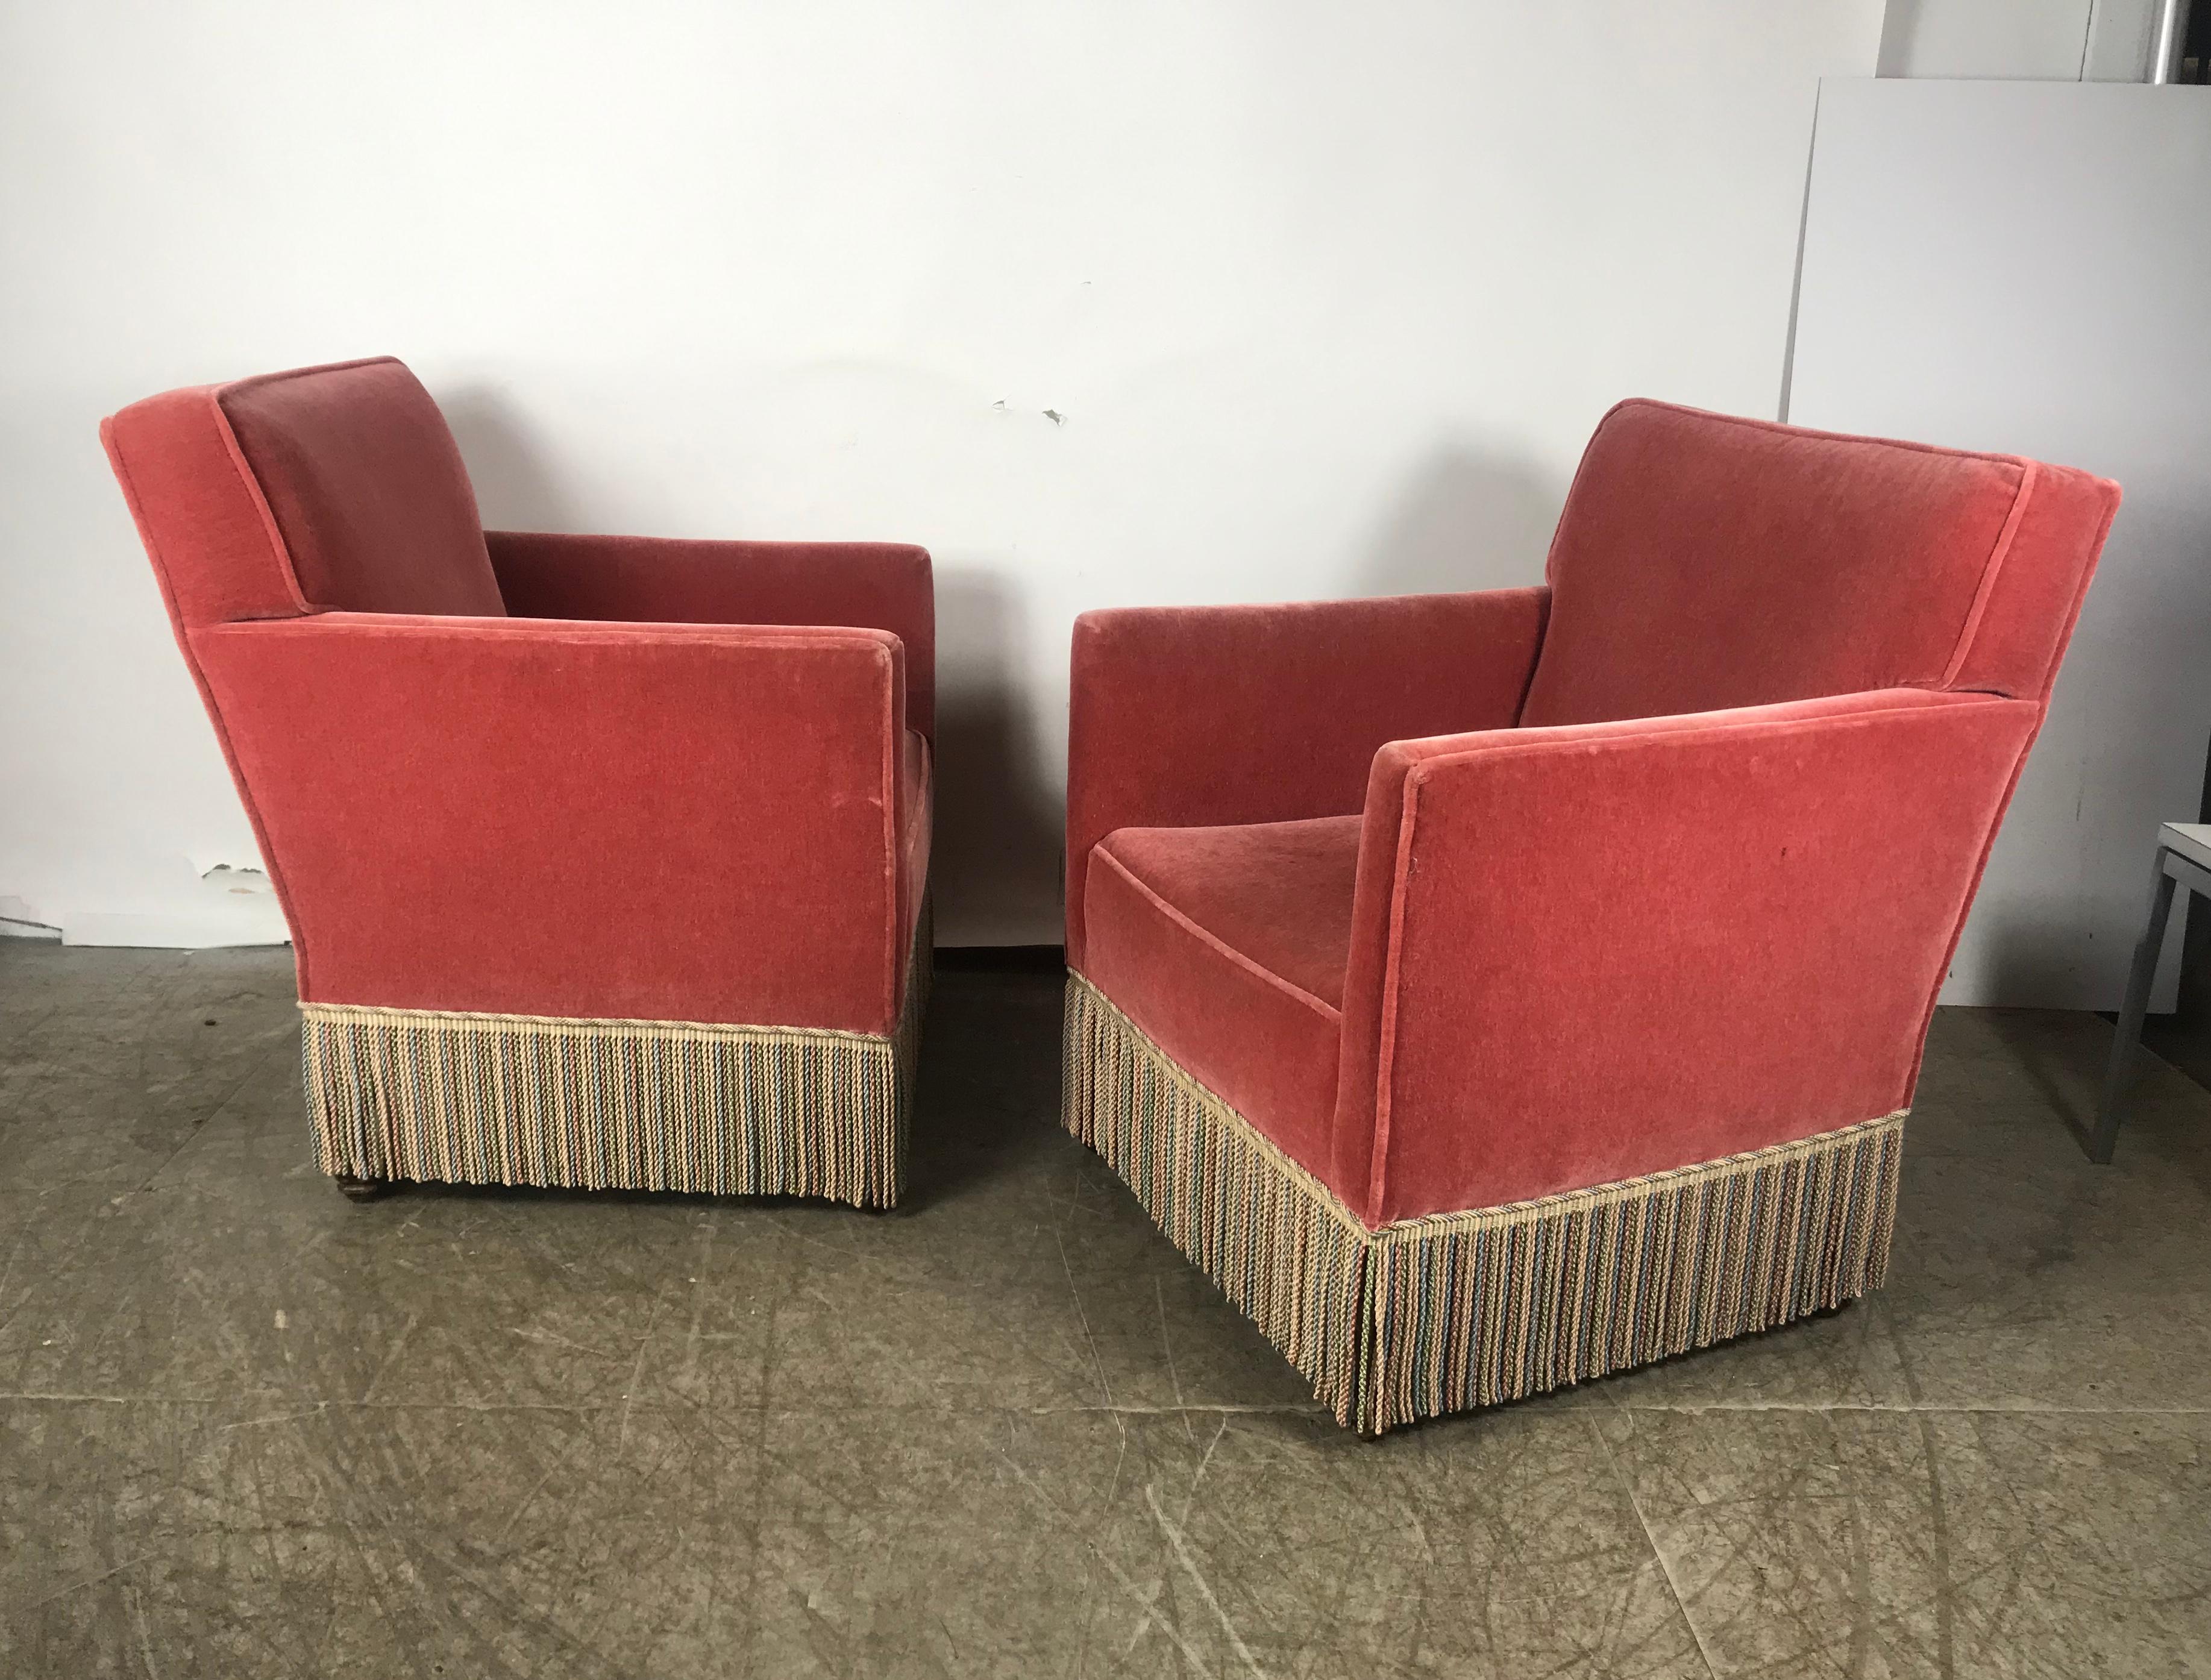 Stunning pair of Art Deco Salmon color Mohair club chairs, Classic modernist design, simple elegance, original salmon color mohair in wonderful condition, retains original fringe, extremely comfortable. Hand delivery avail to New York City or